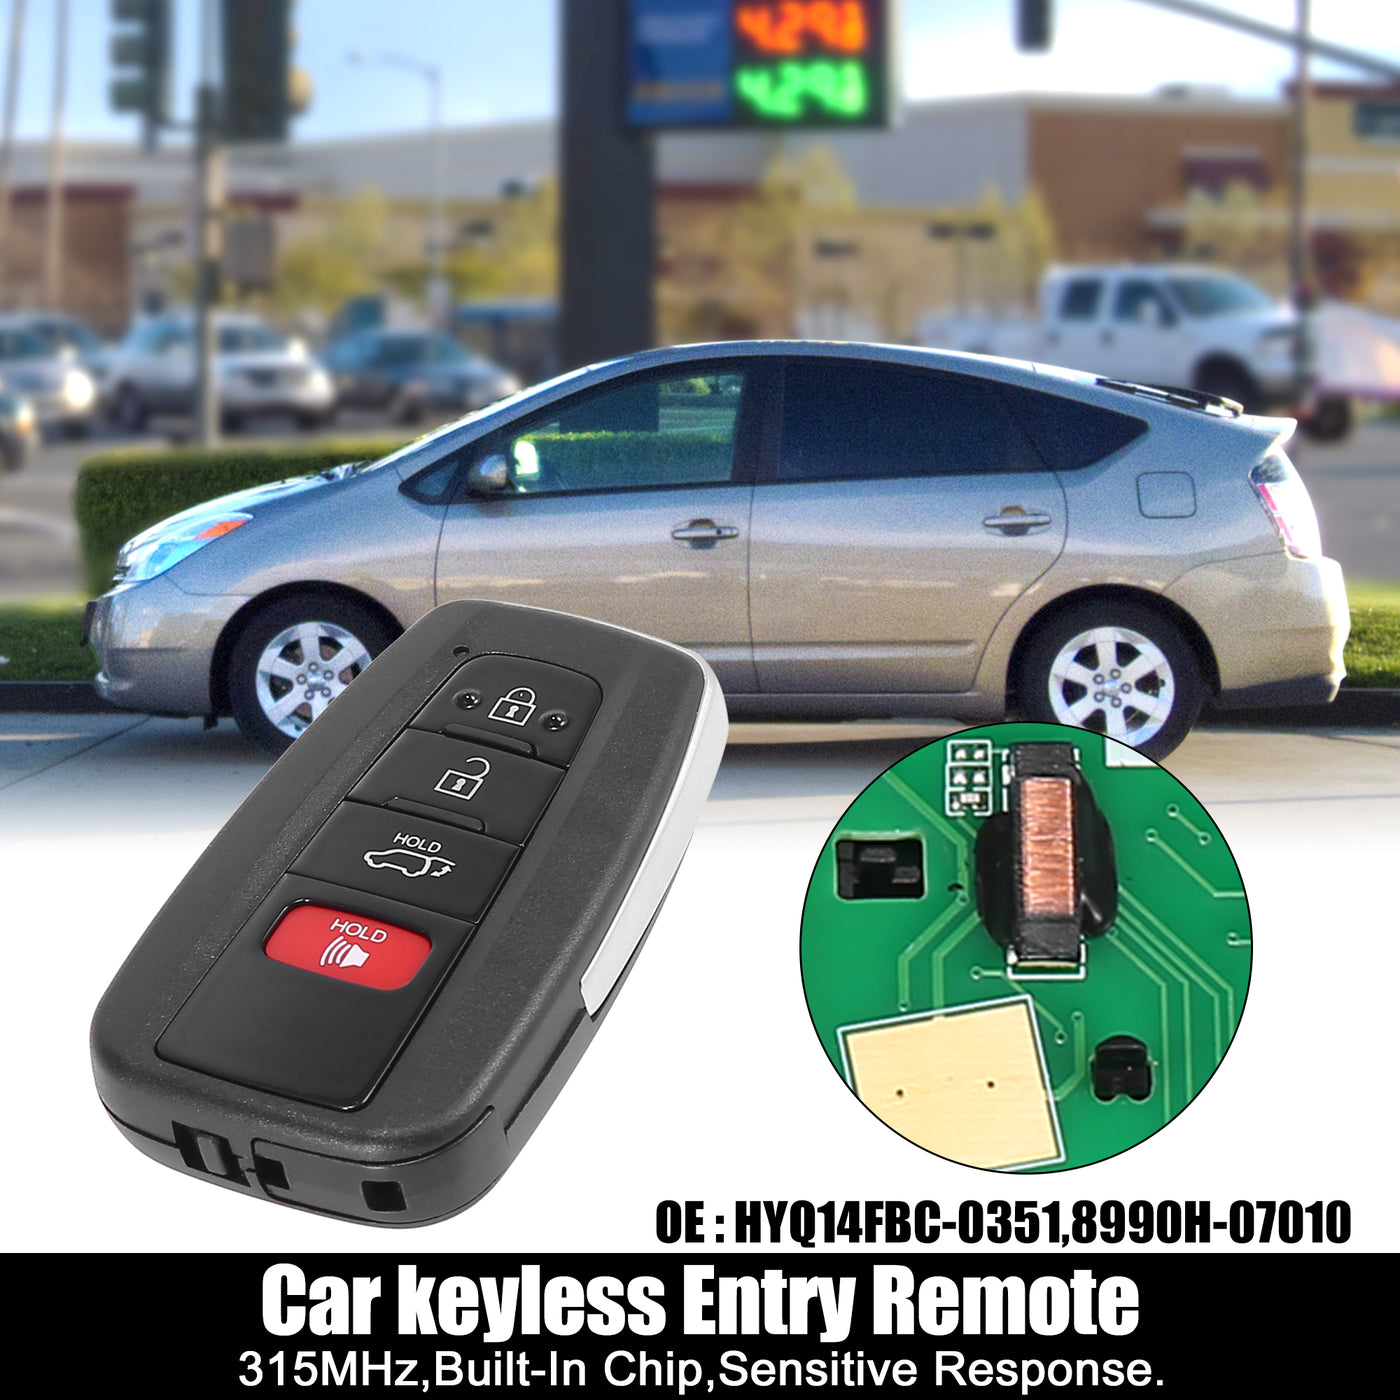 X AUTOHAUX 314.3MHz 8990H-0R030 Replacement Keyless Entry Remote Car Key Fob for Toyota RAV4 2019 2020 2021 FCC ID: HYQ14FBC-0351 3 Button with Door Key